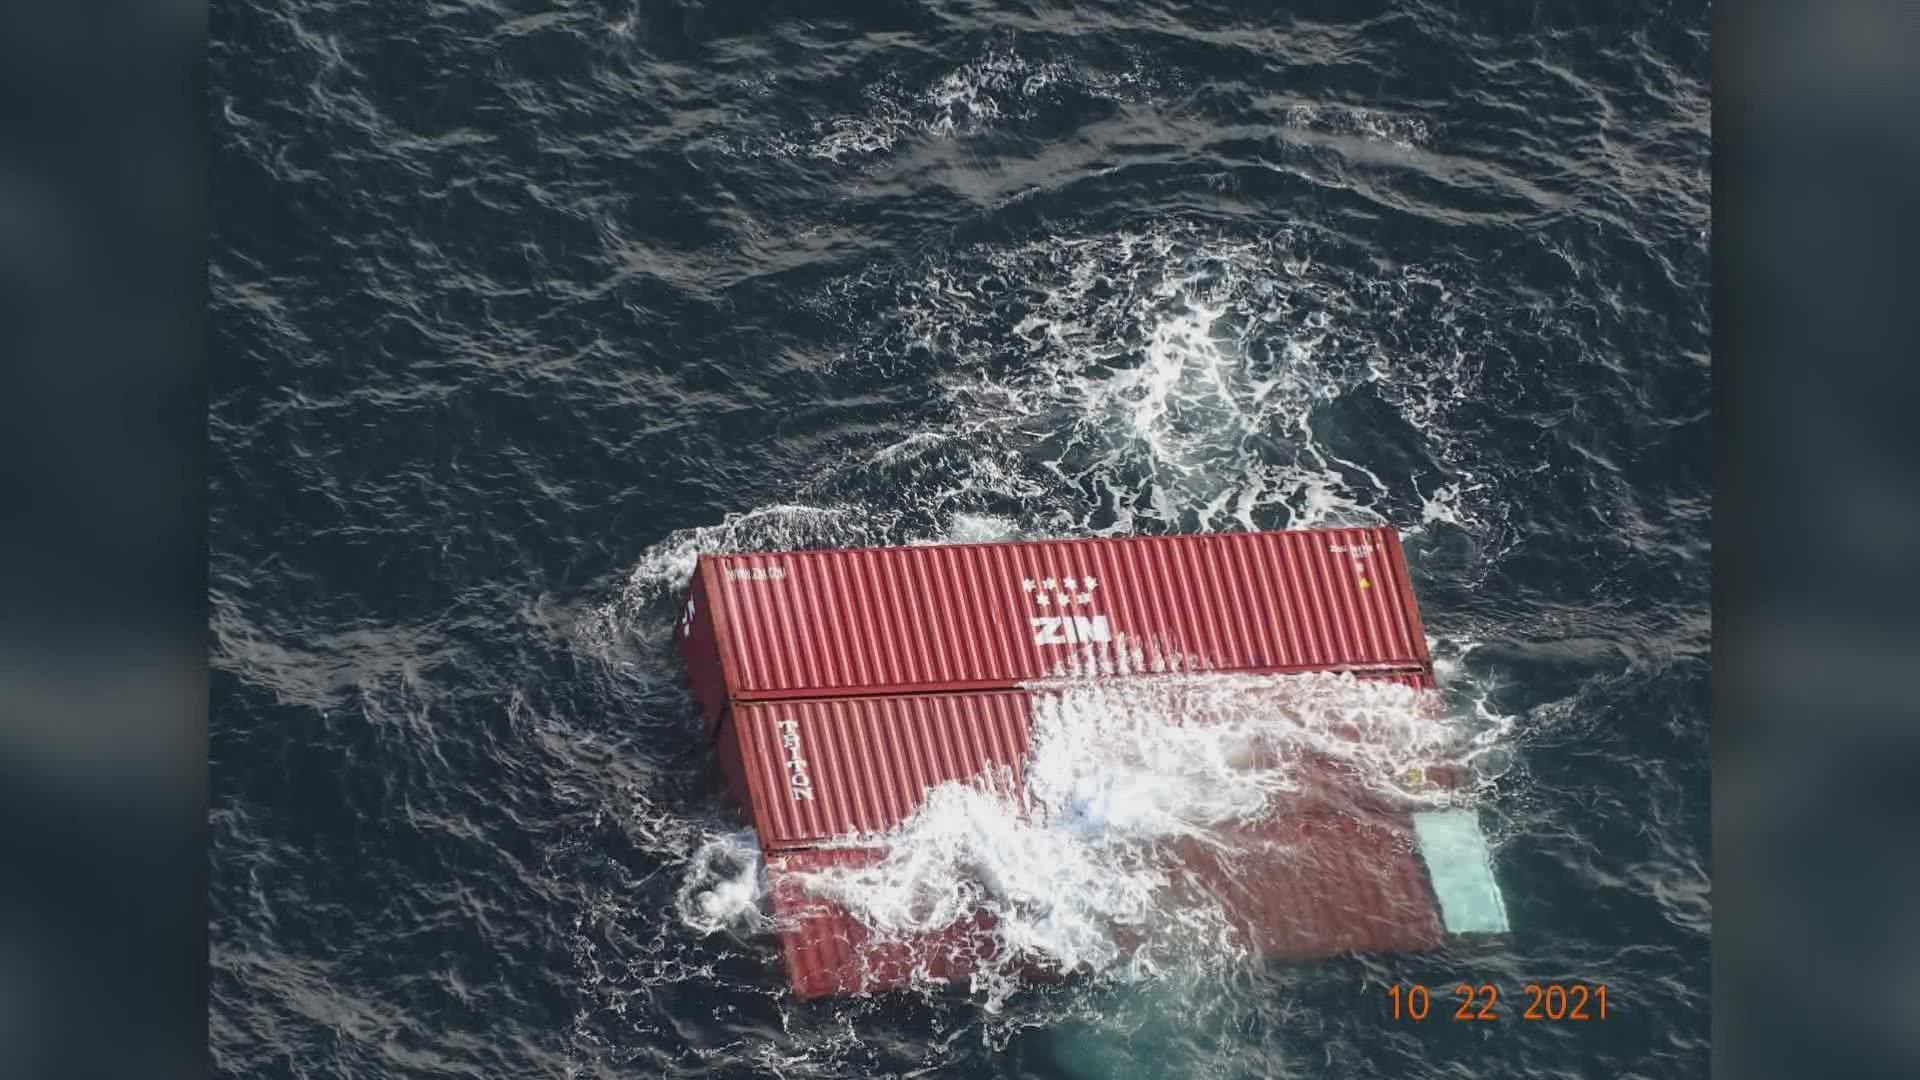 Forty containers were lost off a vessel when it listed in rough waters, according to the Coast Guard.